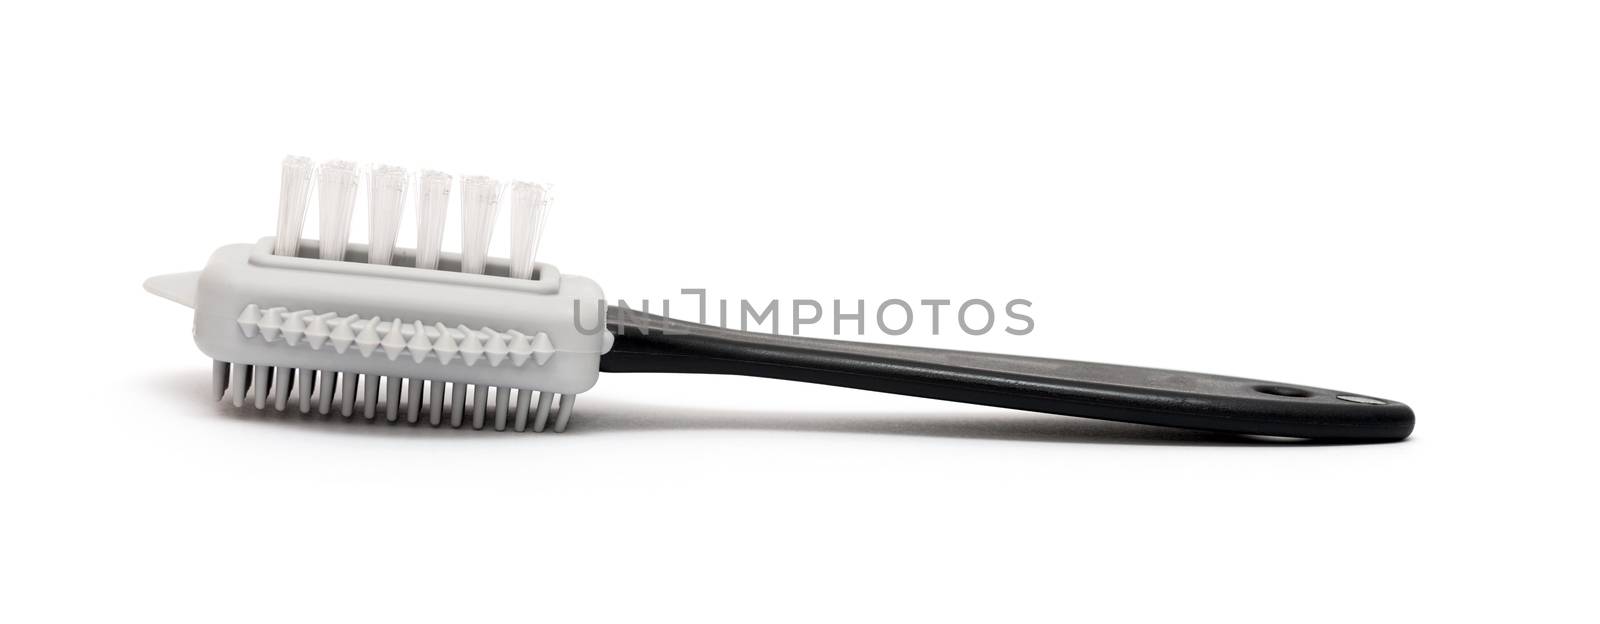 Cloth or shoe cleaning brush isolated over the white background